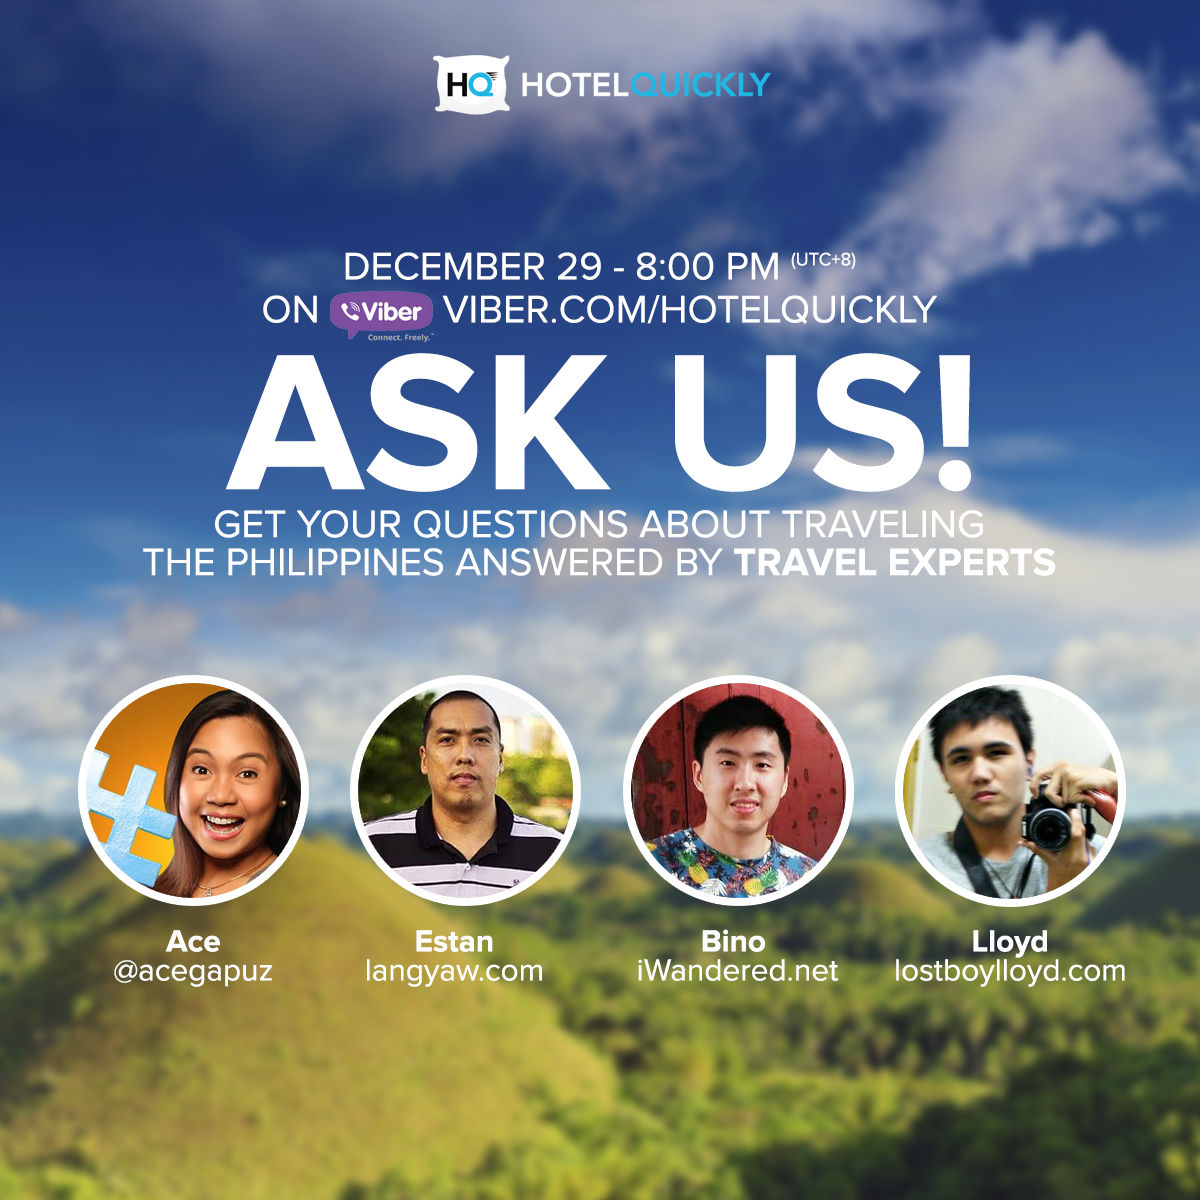 Ready with your questions in traveling the Philippines?